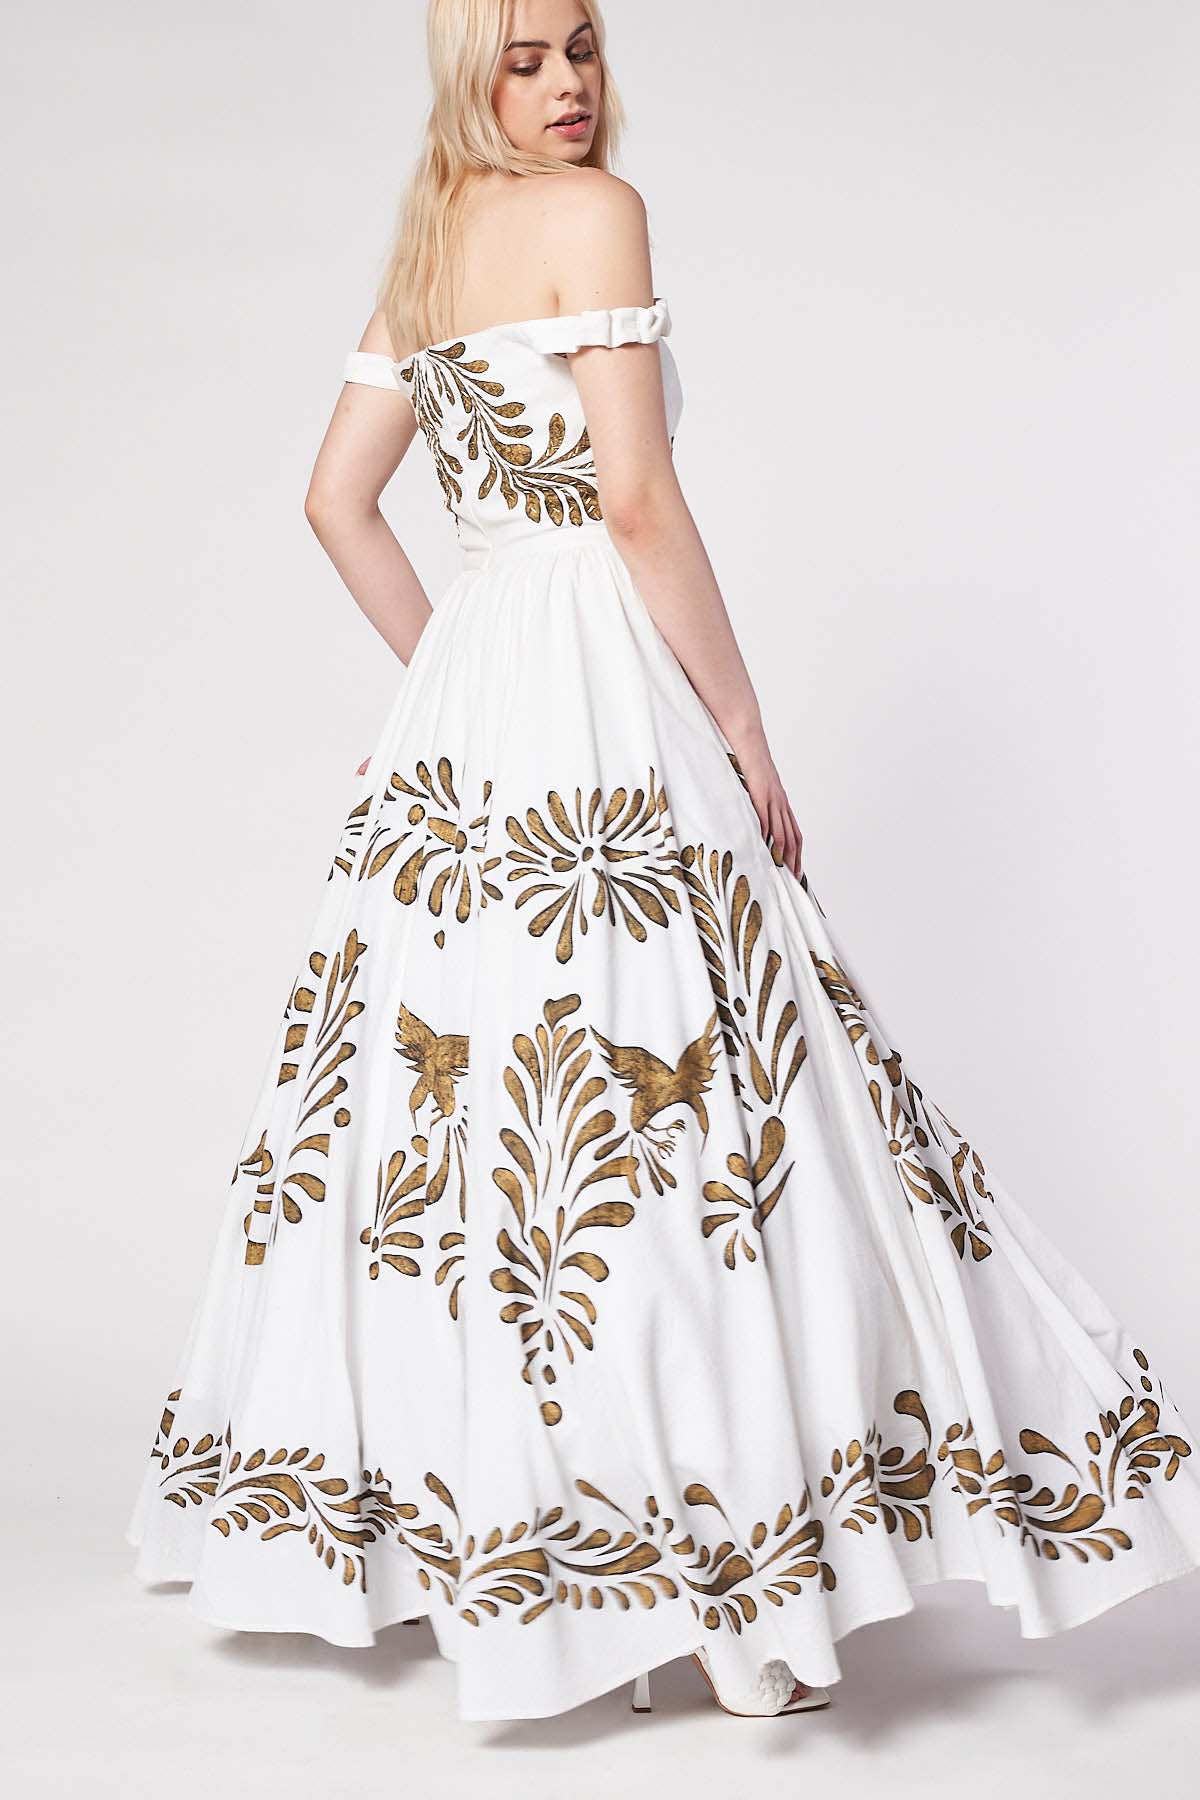 HAND-PAINTED AND HAND-EMBROIDERED LONG DRESS